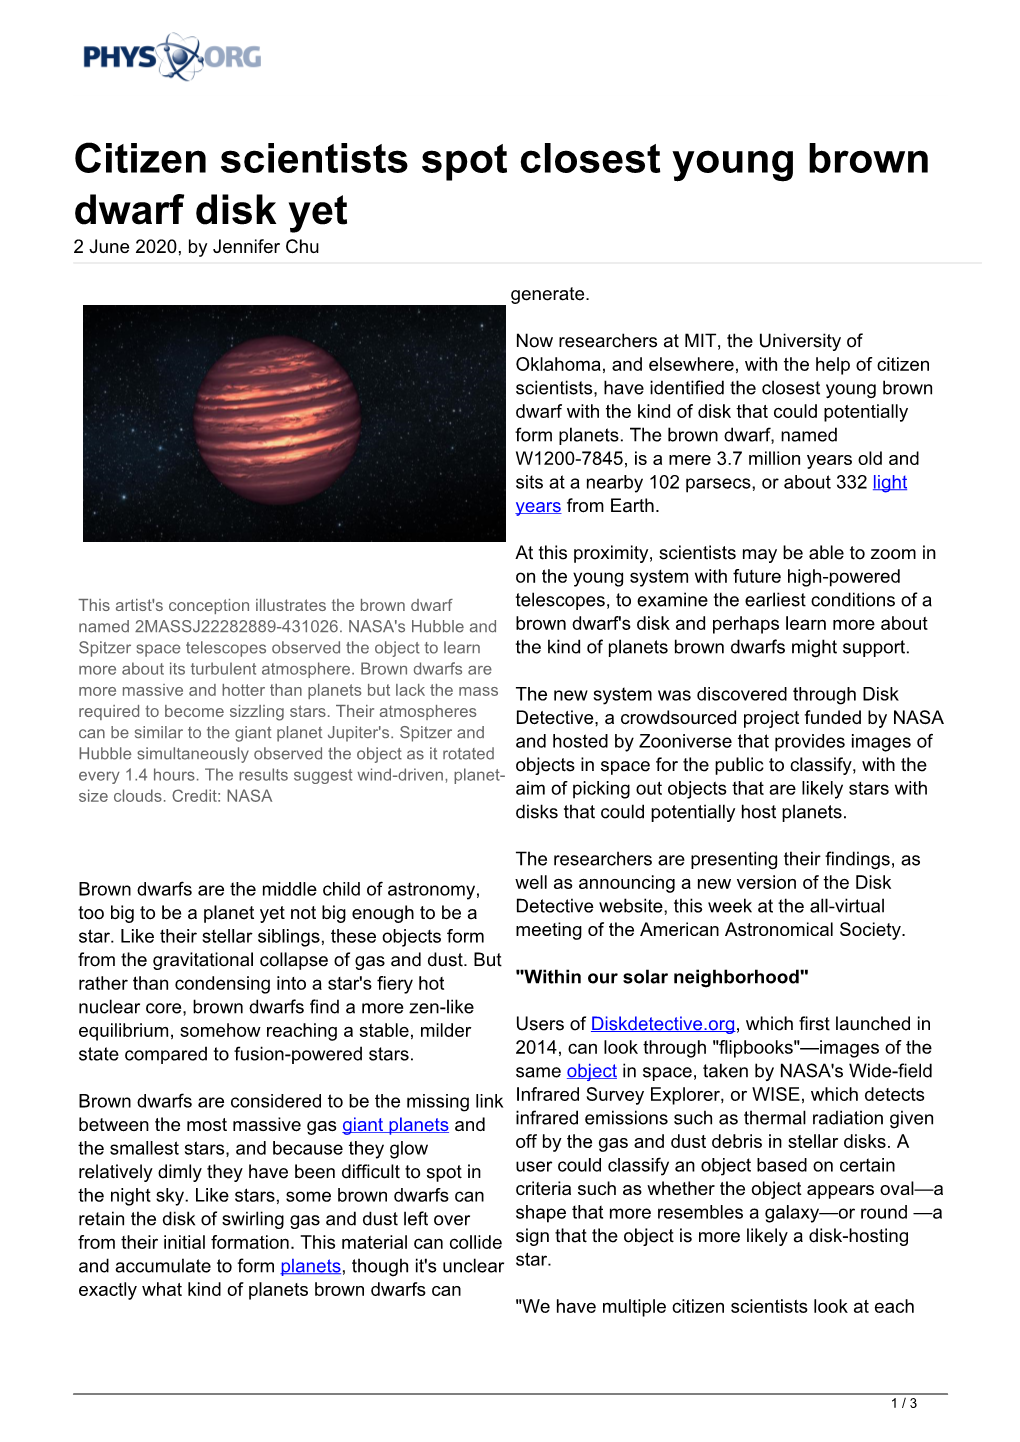 Citizen Scientists Spot Closest Young Brown Dwarf Disk Yet 2 June 2020, by Jennifer Chu